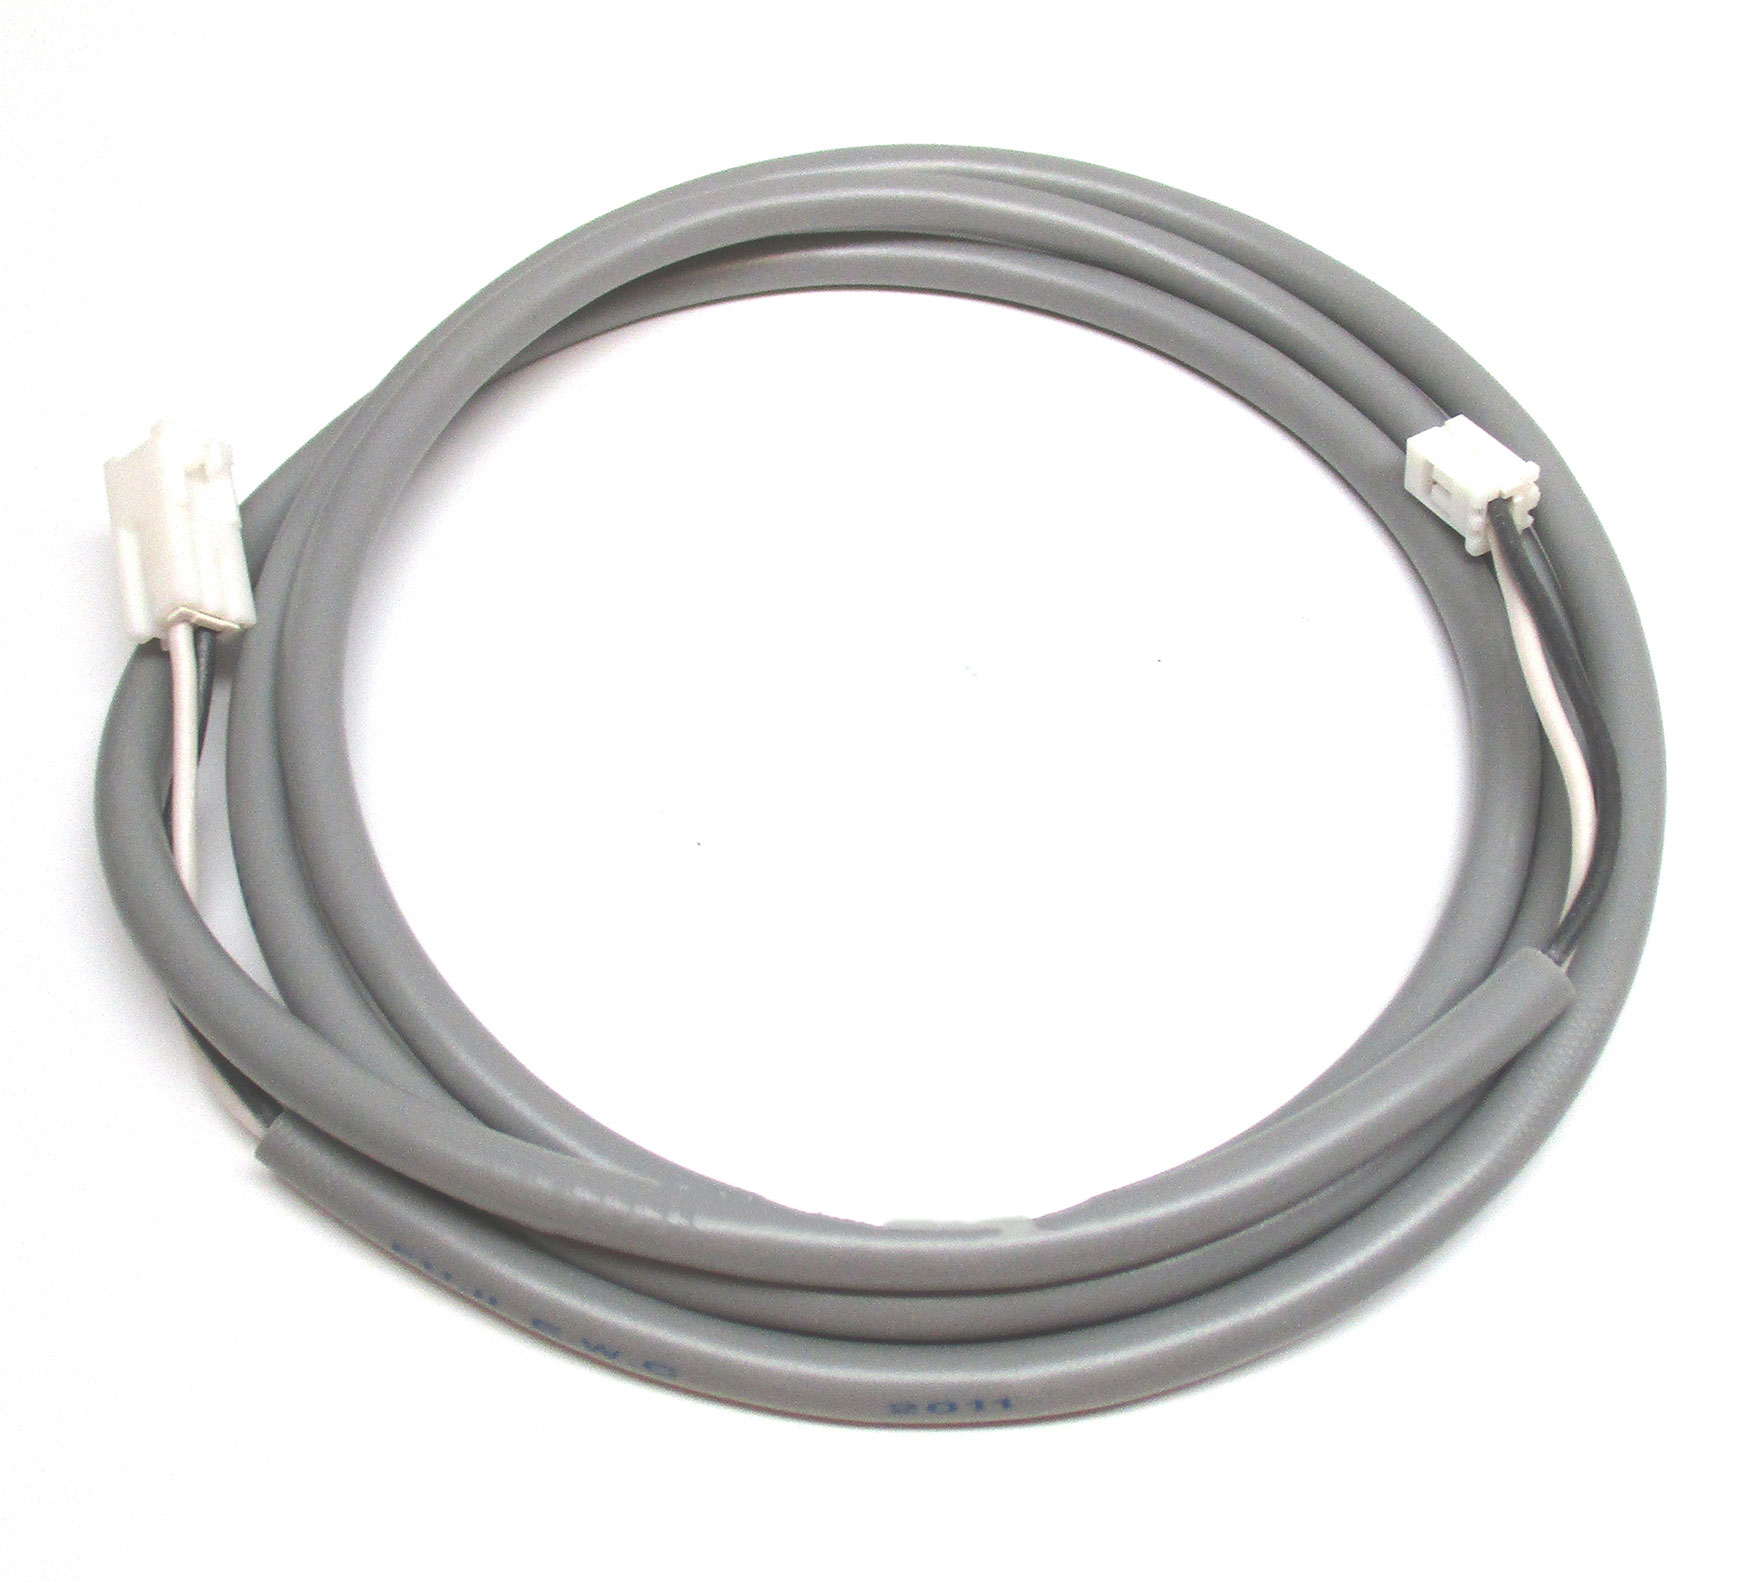 COMMUNICATION CABLE #EKKOJ FOR CONNECTING T-K3 HEATERS